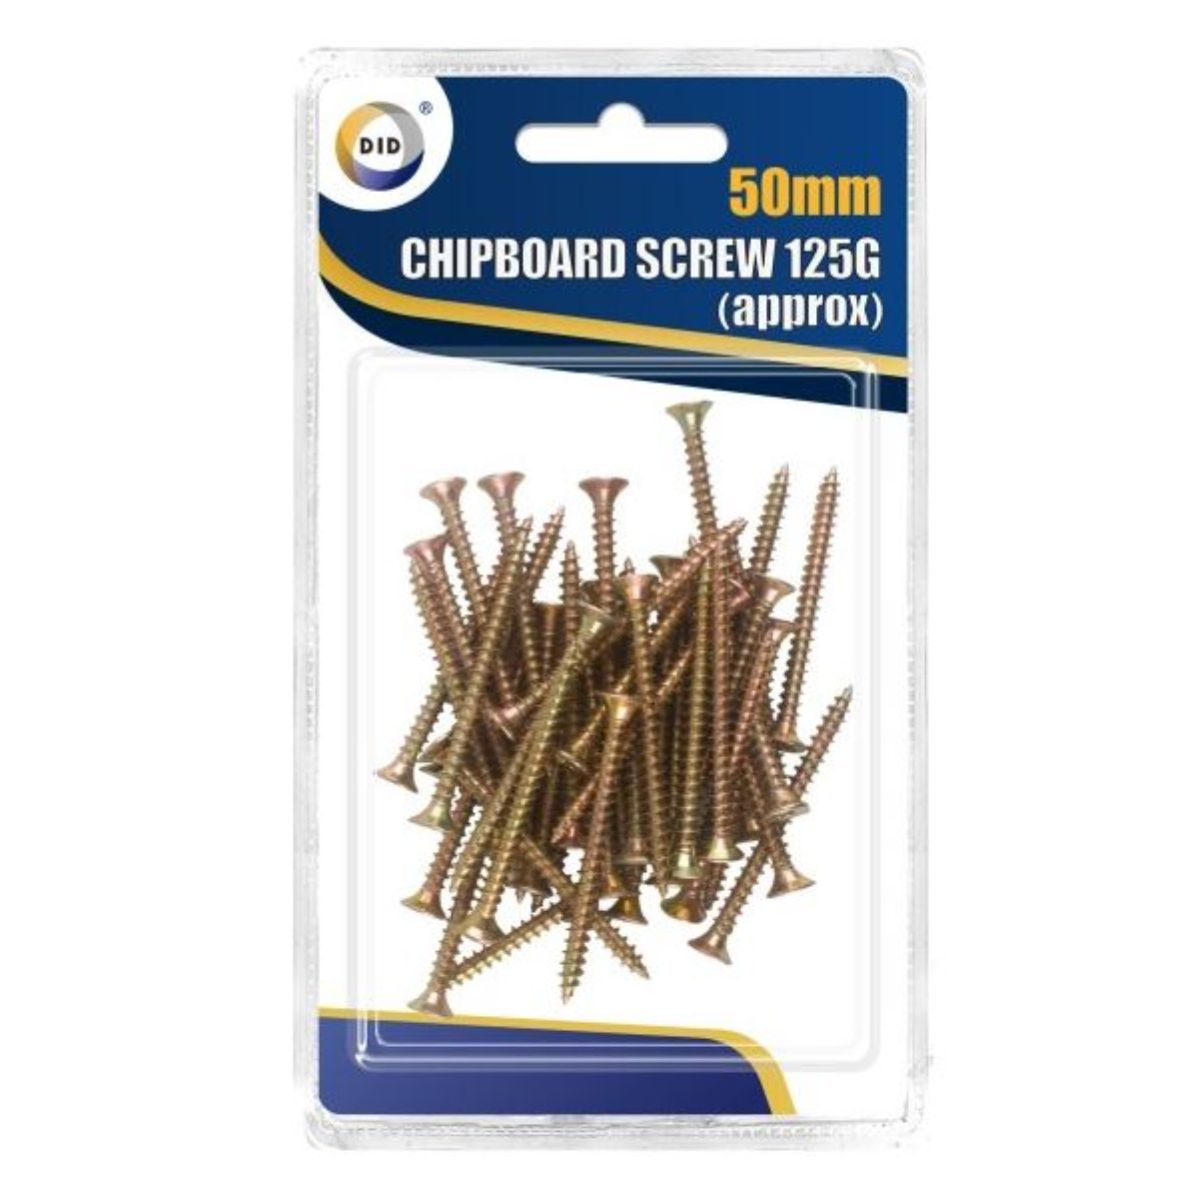 Packaging containing approximately DID - 50mm Chipboard Screws - 125g displayed on a blue and yellow card.